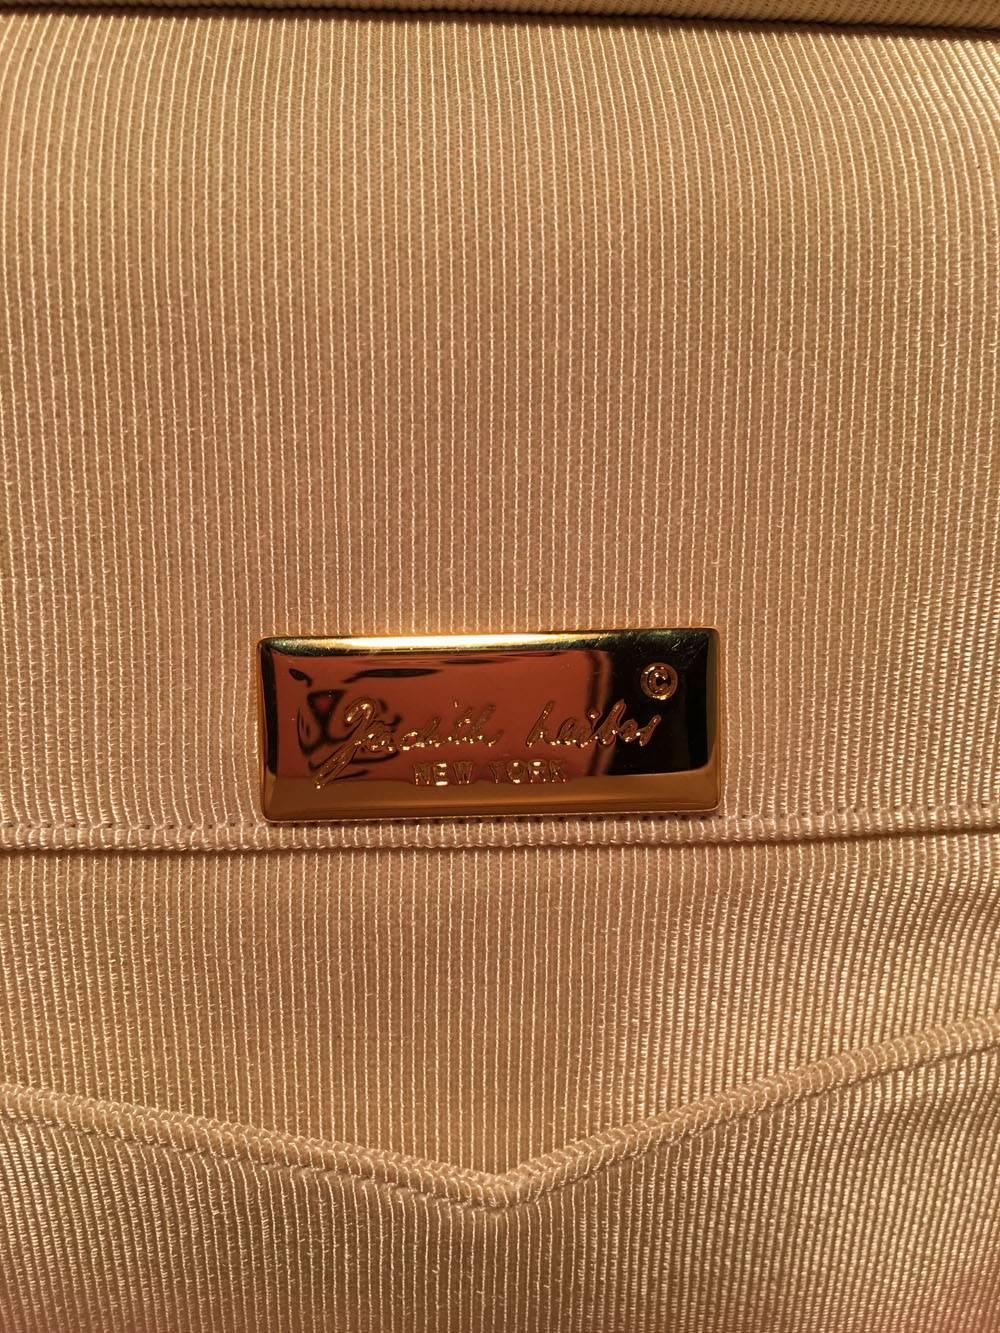 Judith Leiber Vintage Cream Leather Clutch For Sale 2